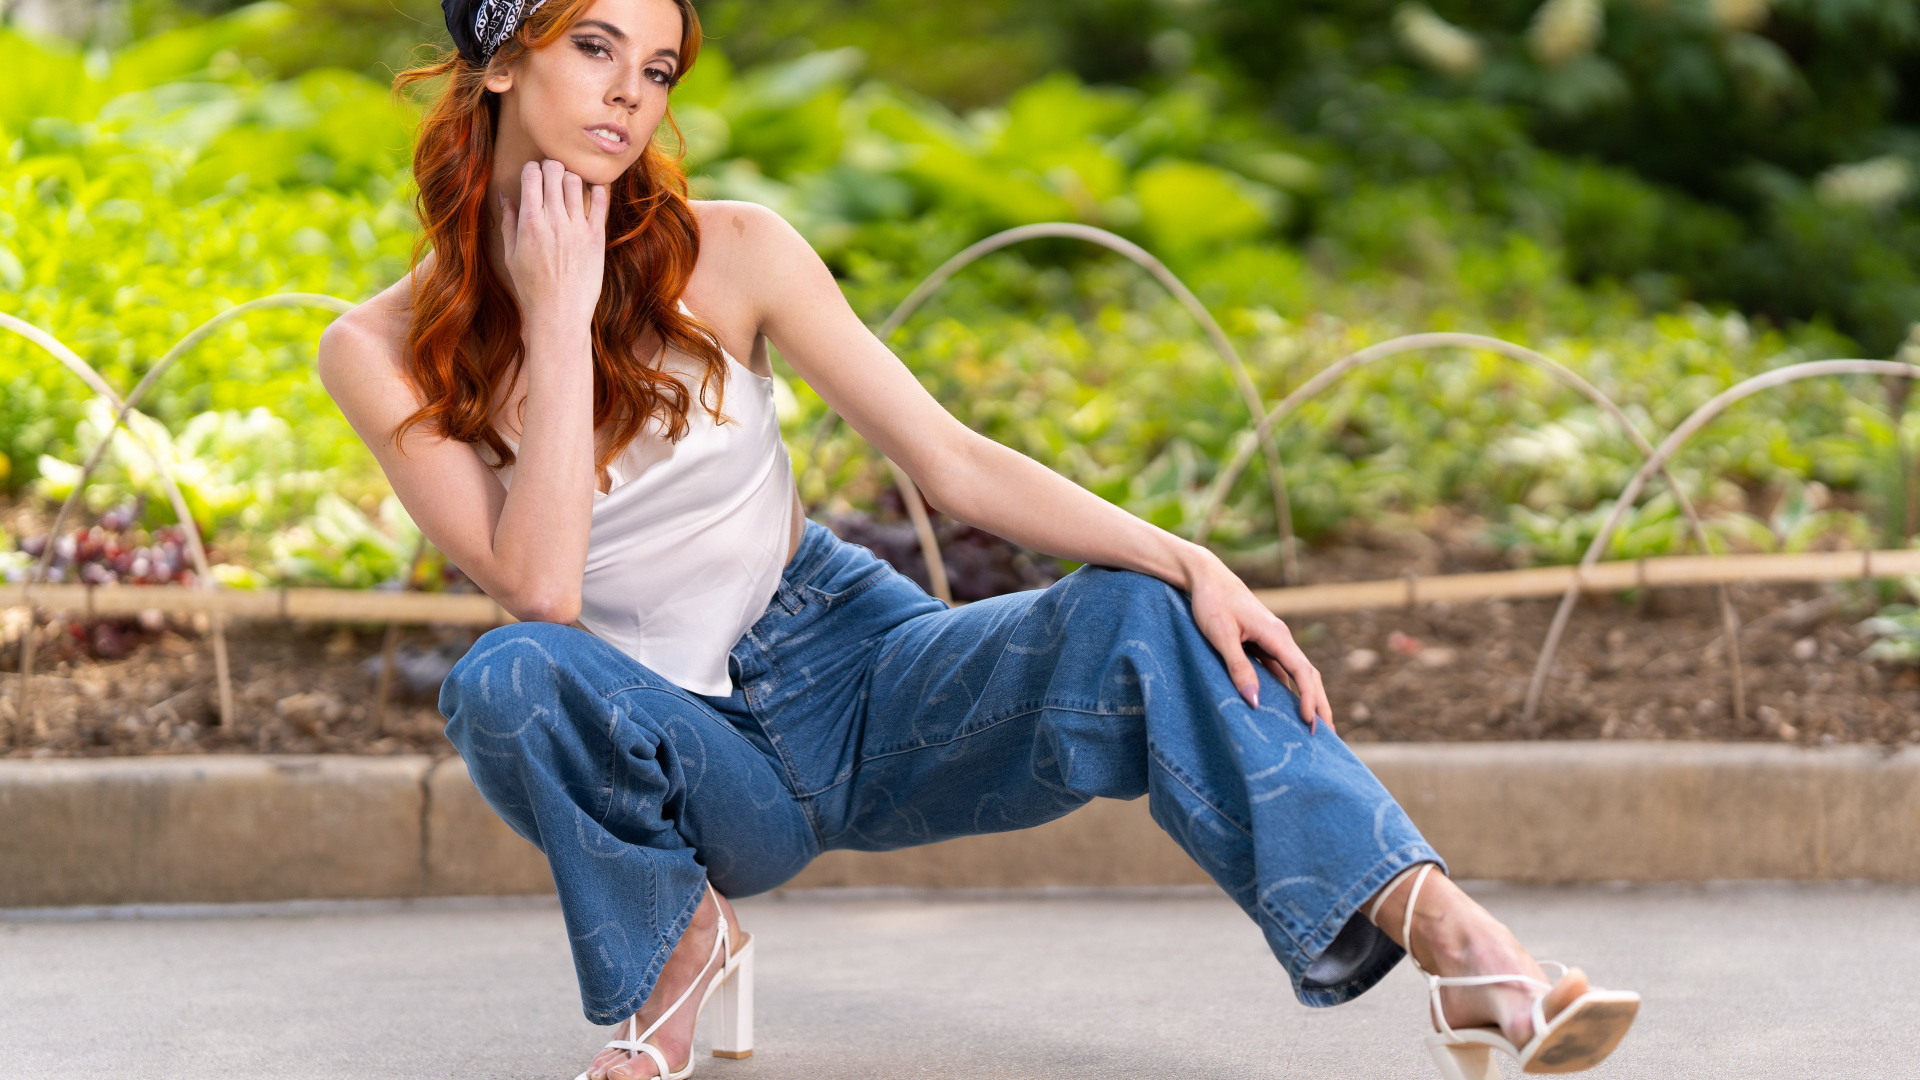 Red-haired girl in blue jeans